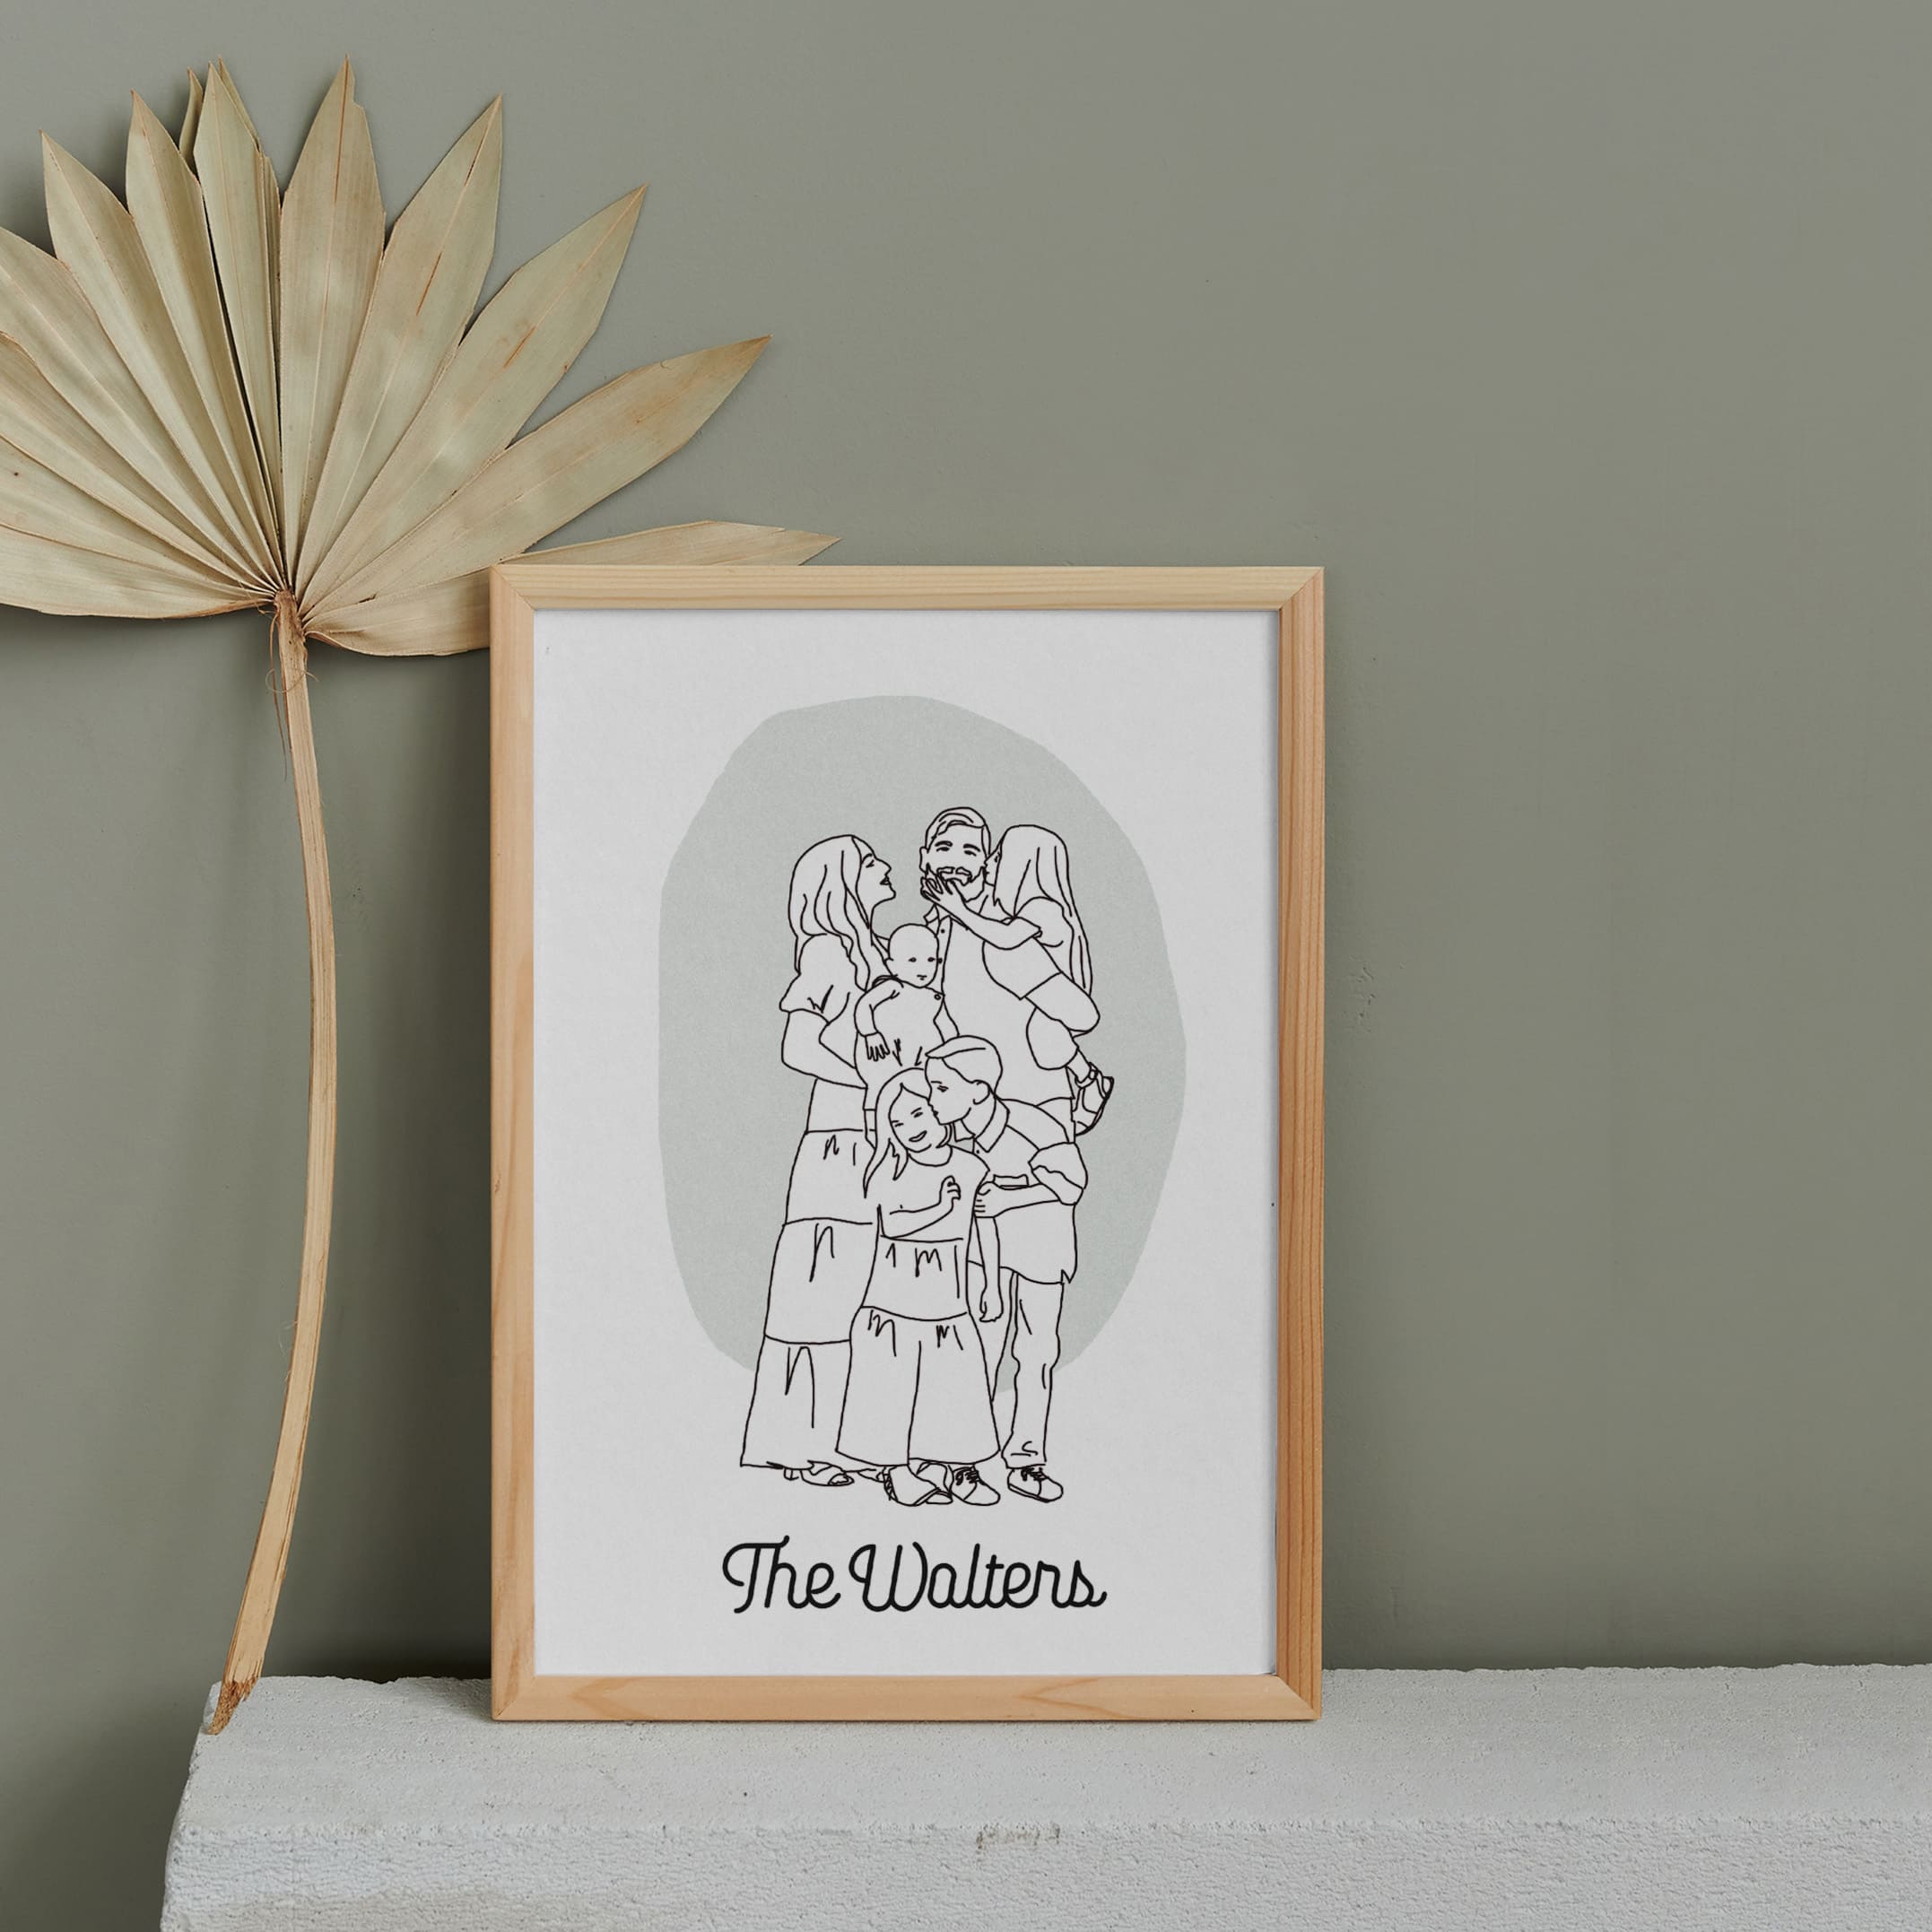 custom line portrait illustration of family from photo with your family name in digital style to be printed and framed wall art decor